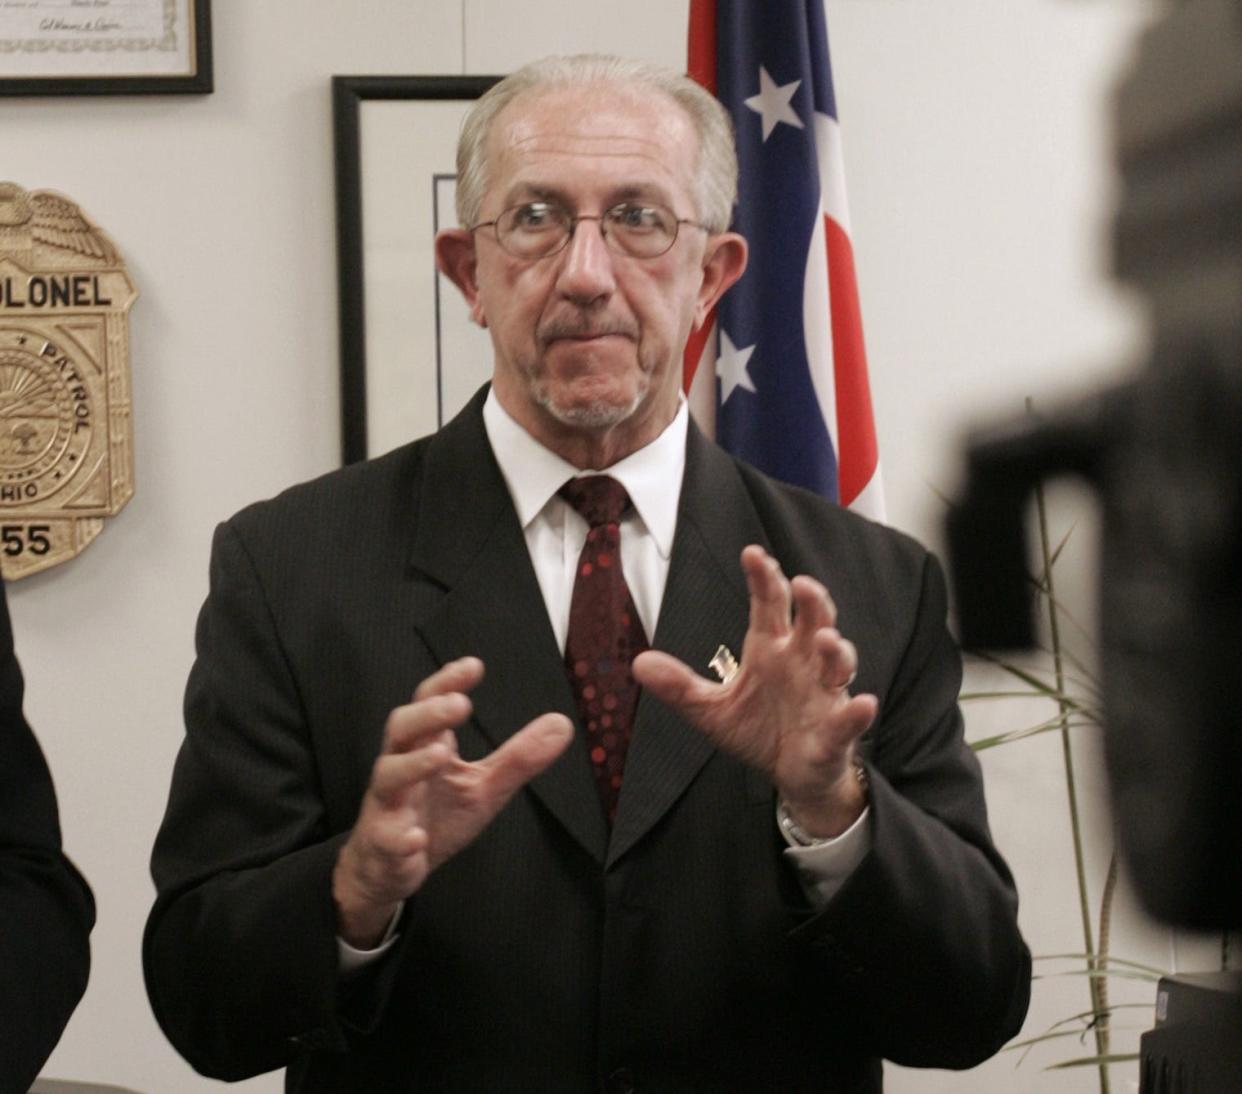 Thomas P. Charles, seen here in 2006, served as state inspector general and director of the Ohio Department of Public Safety.